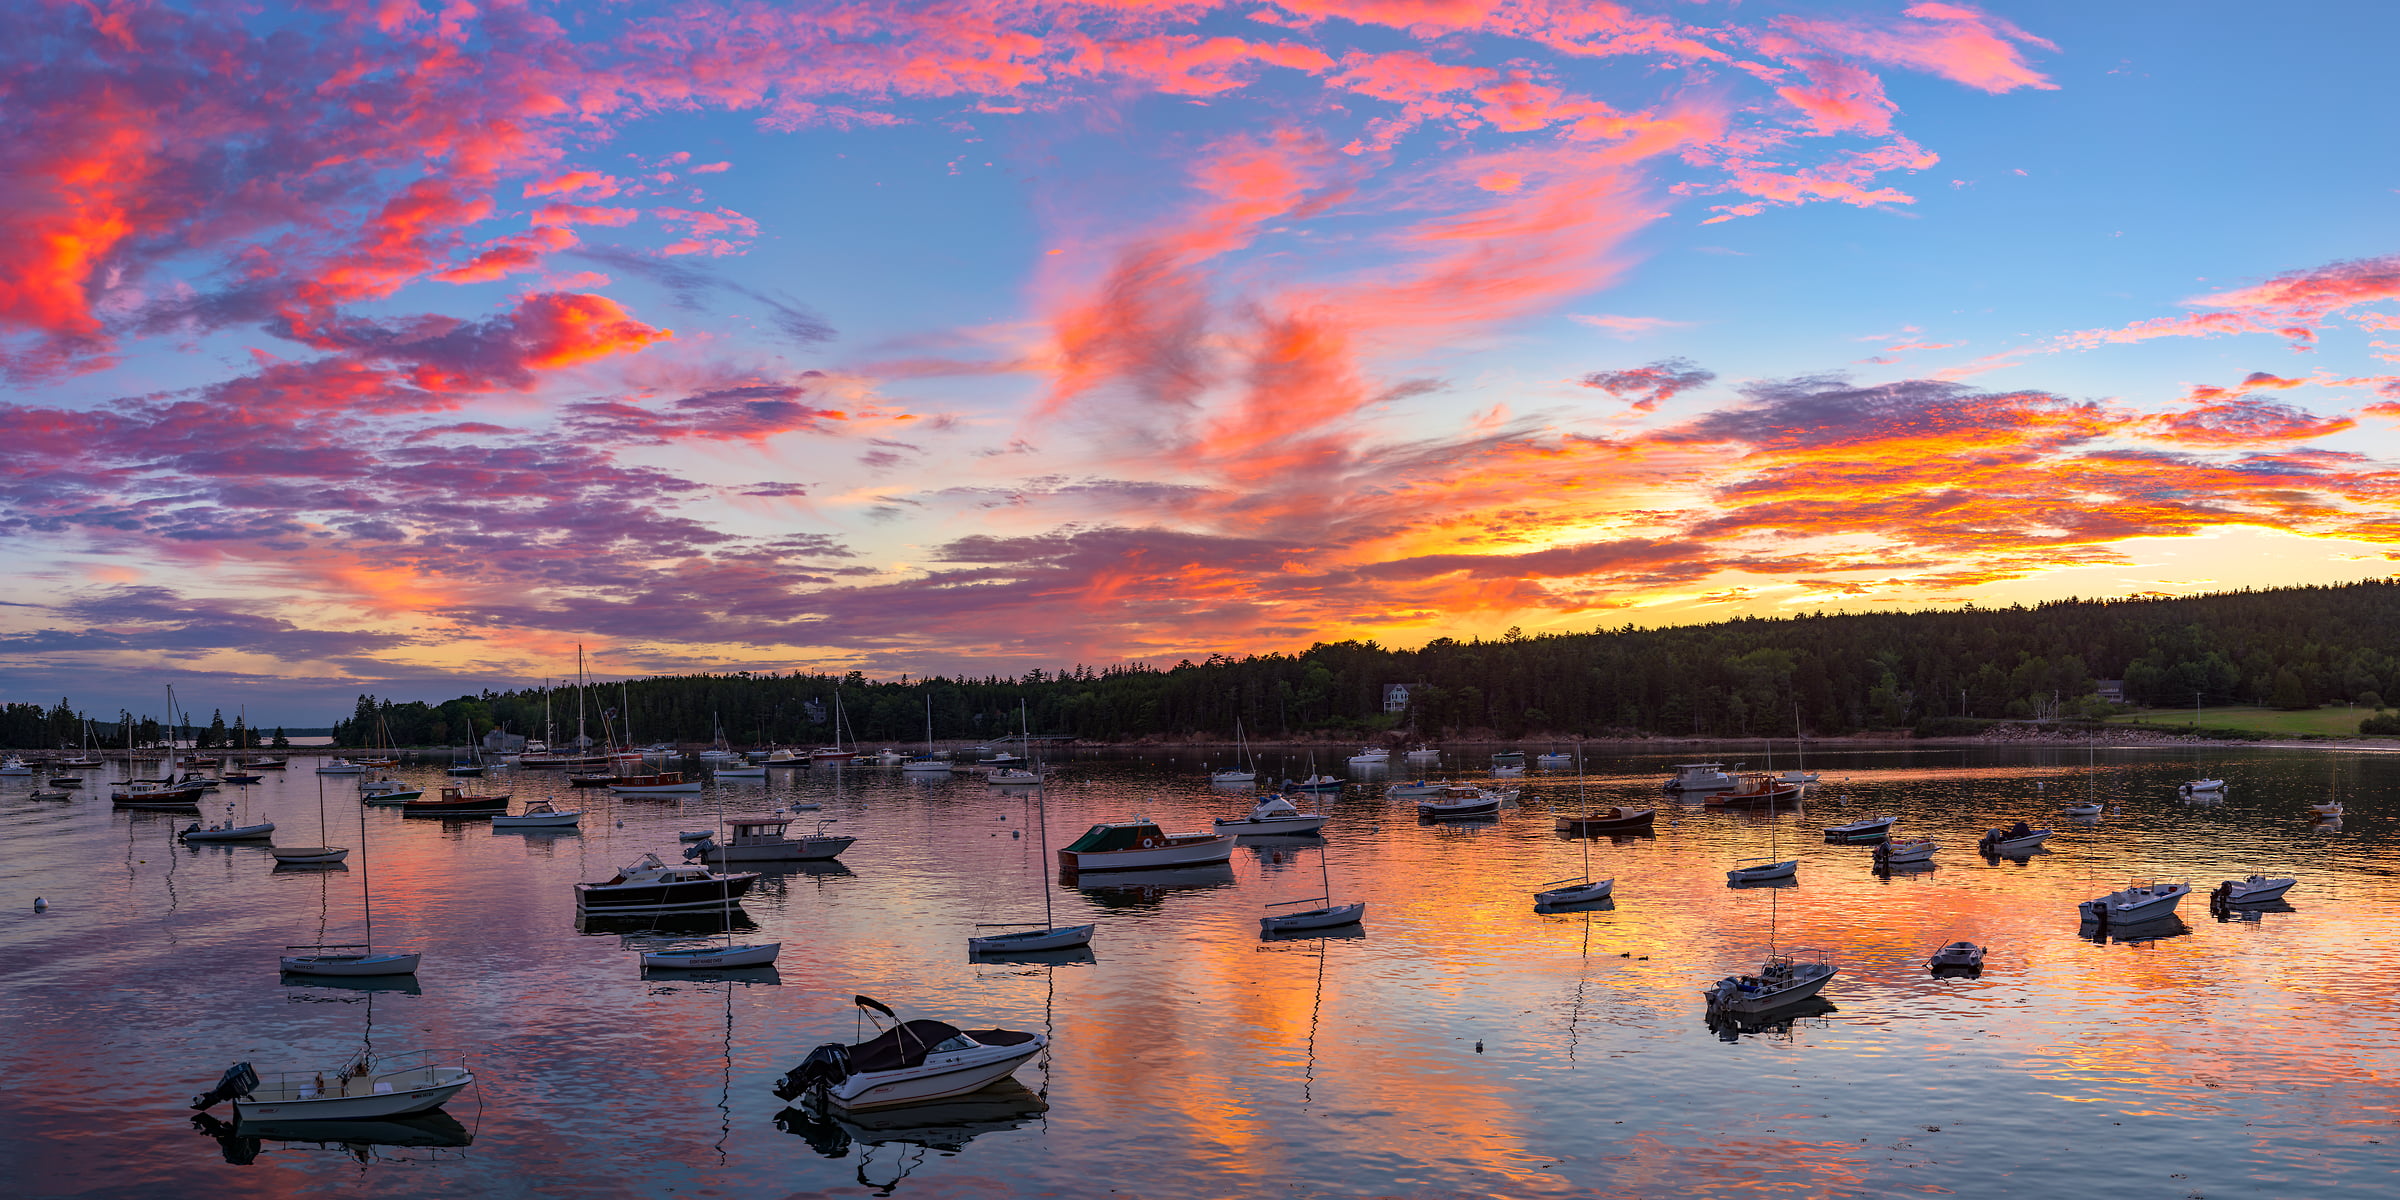 551 megapixels! A very high resolution, large-format VAST photo of a New England harbor with boats at sunset; fine art landscape photograph created by Aaron Priest in Seal Harbor, Maine.